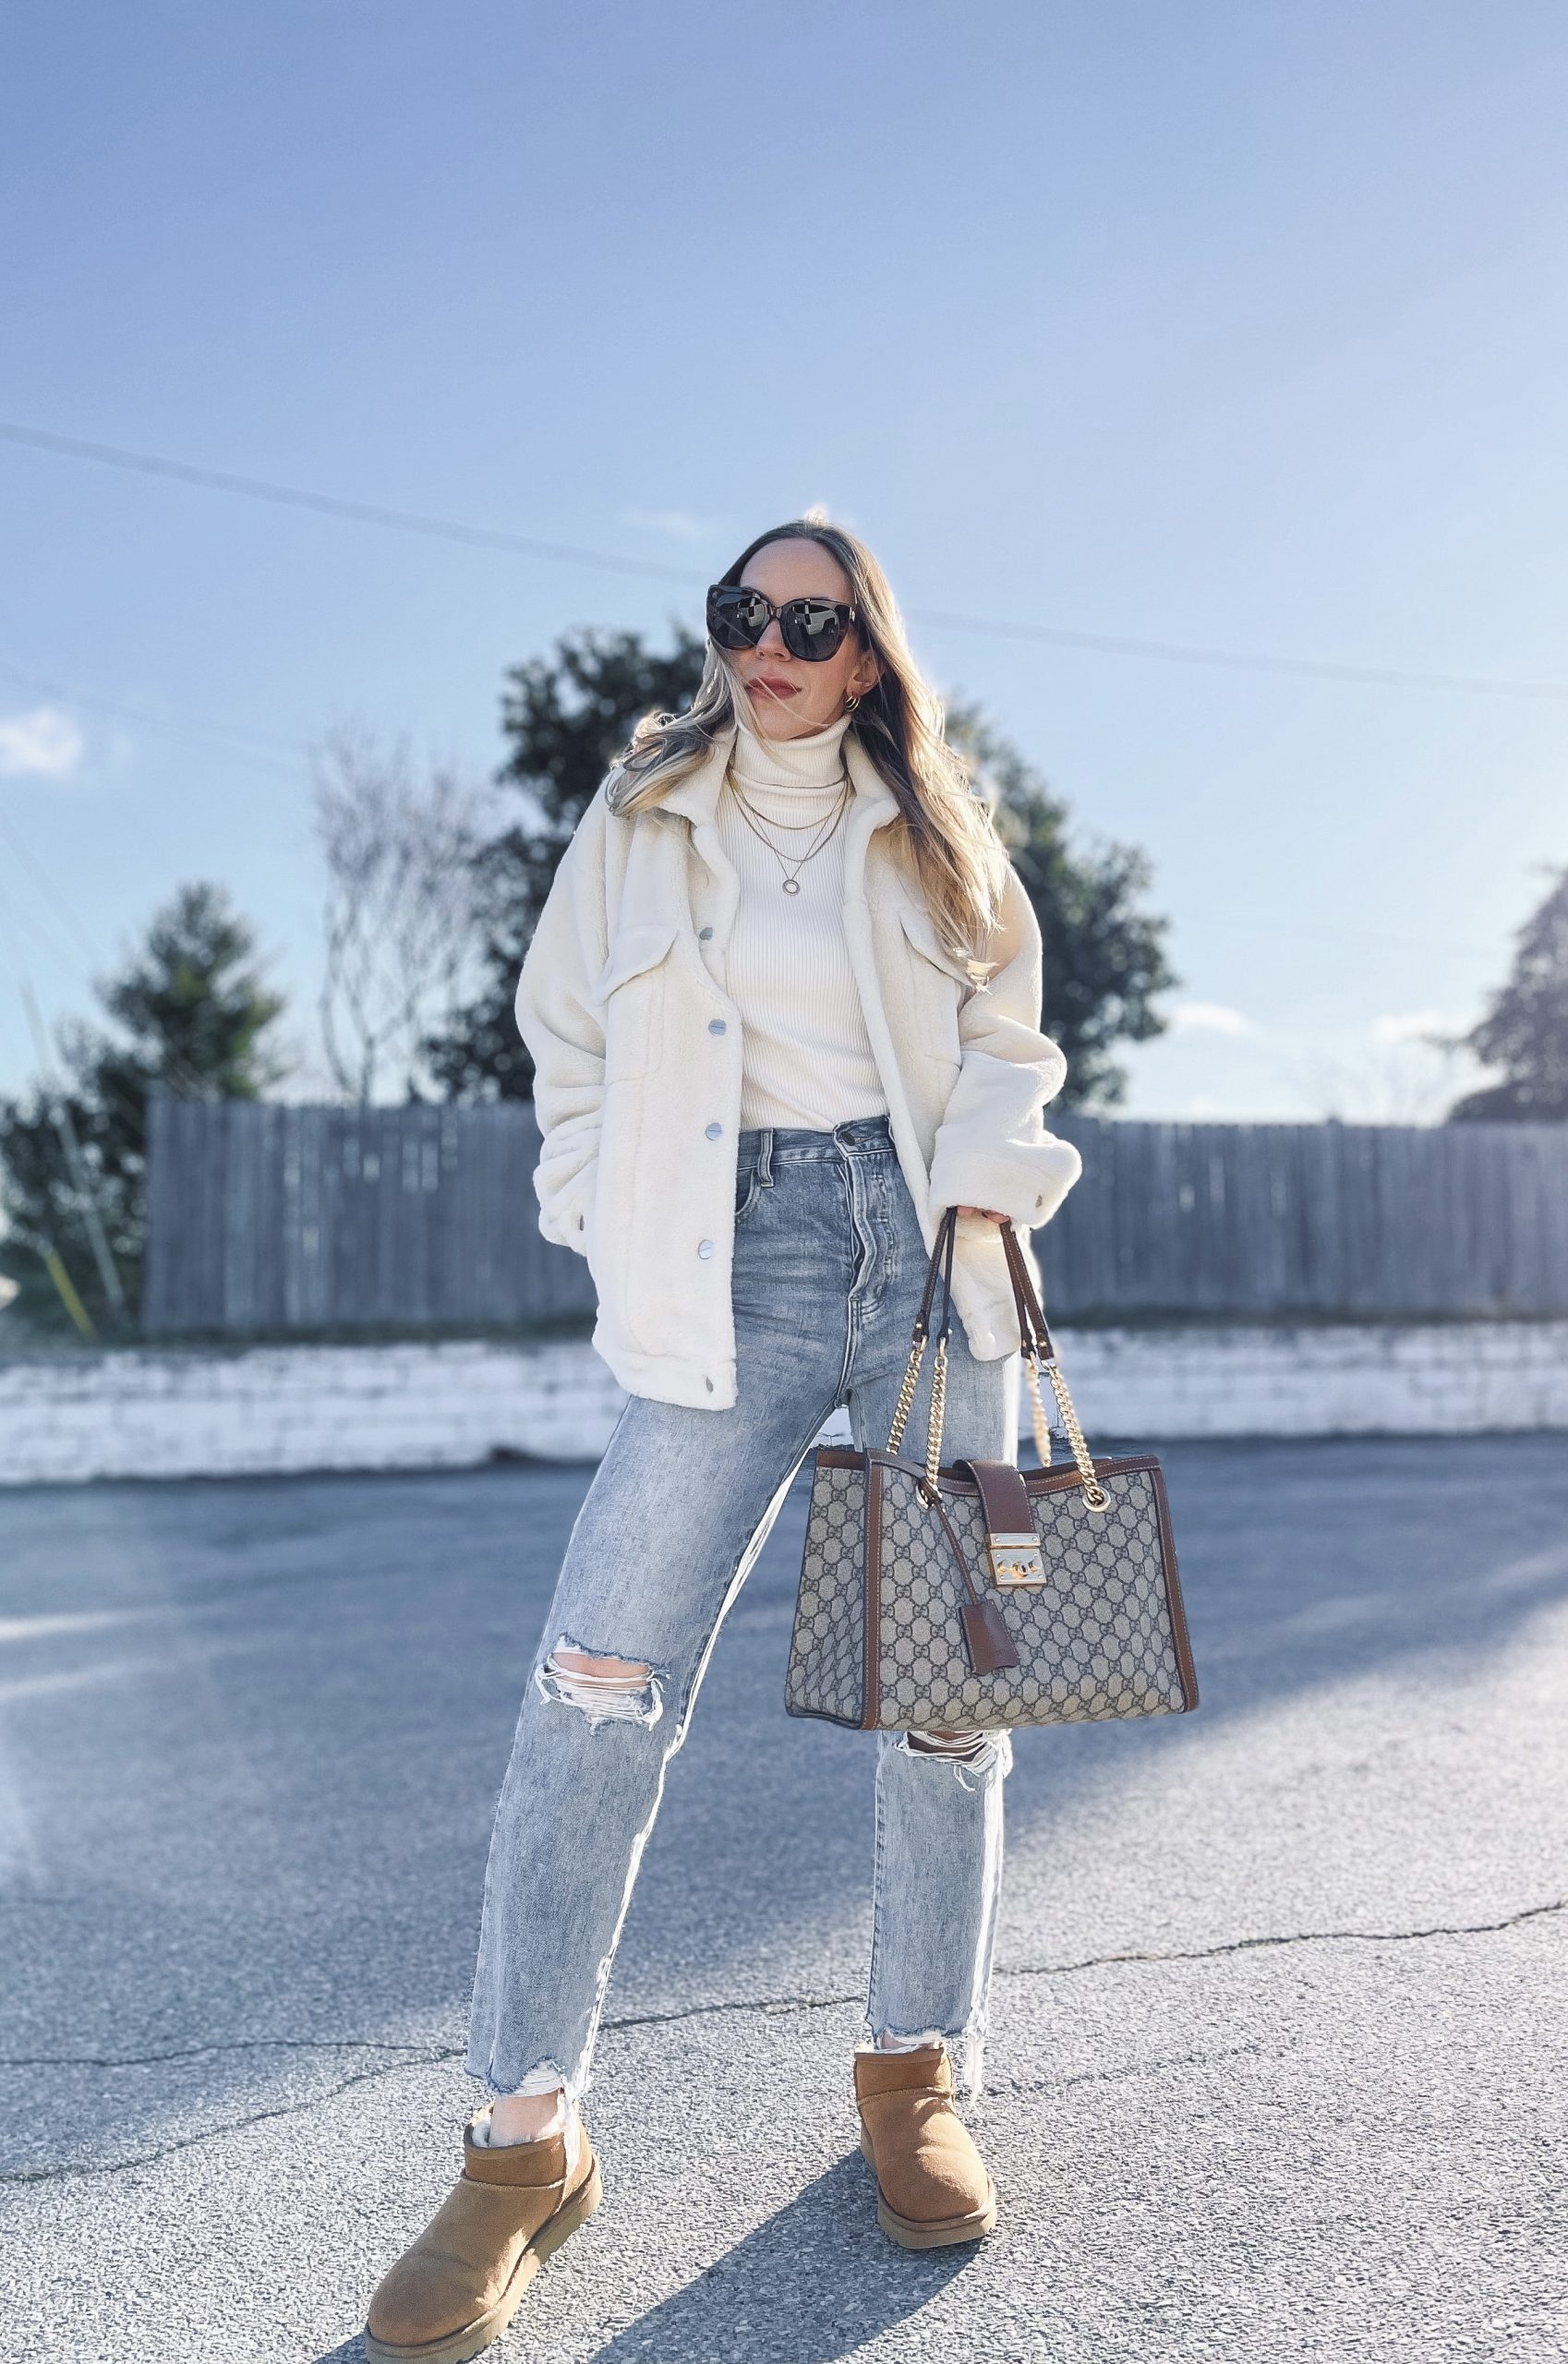 louis vuitton bags and ugg boots outfit